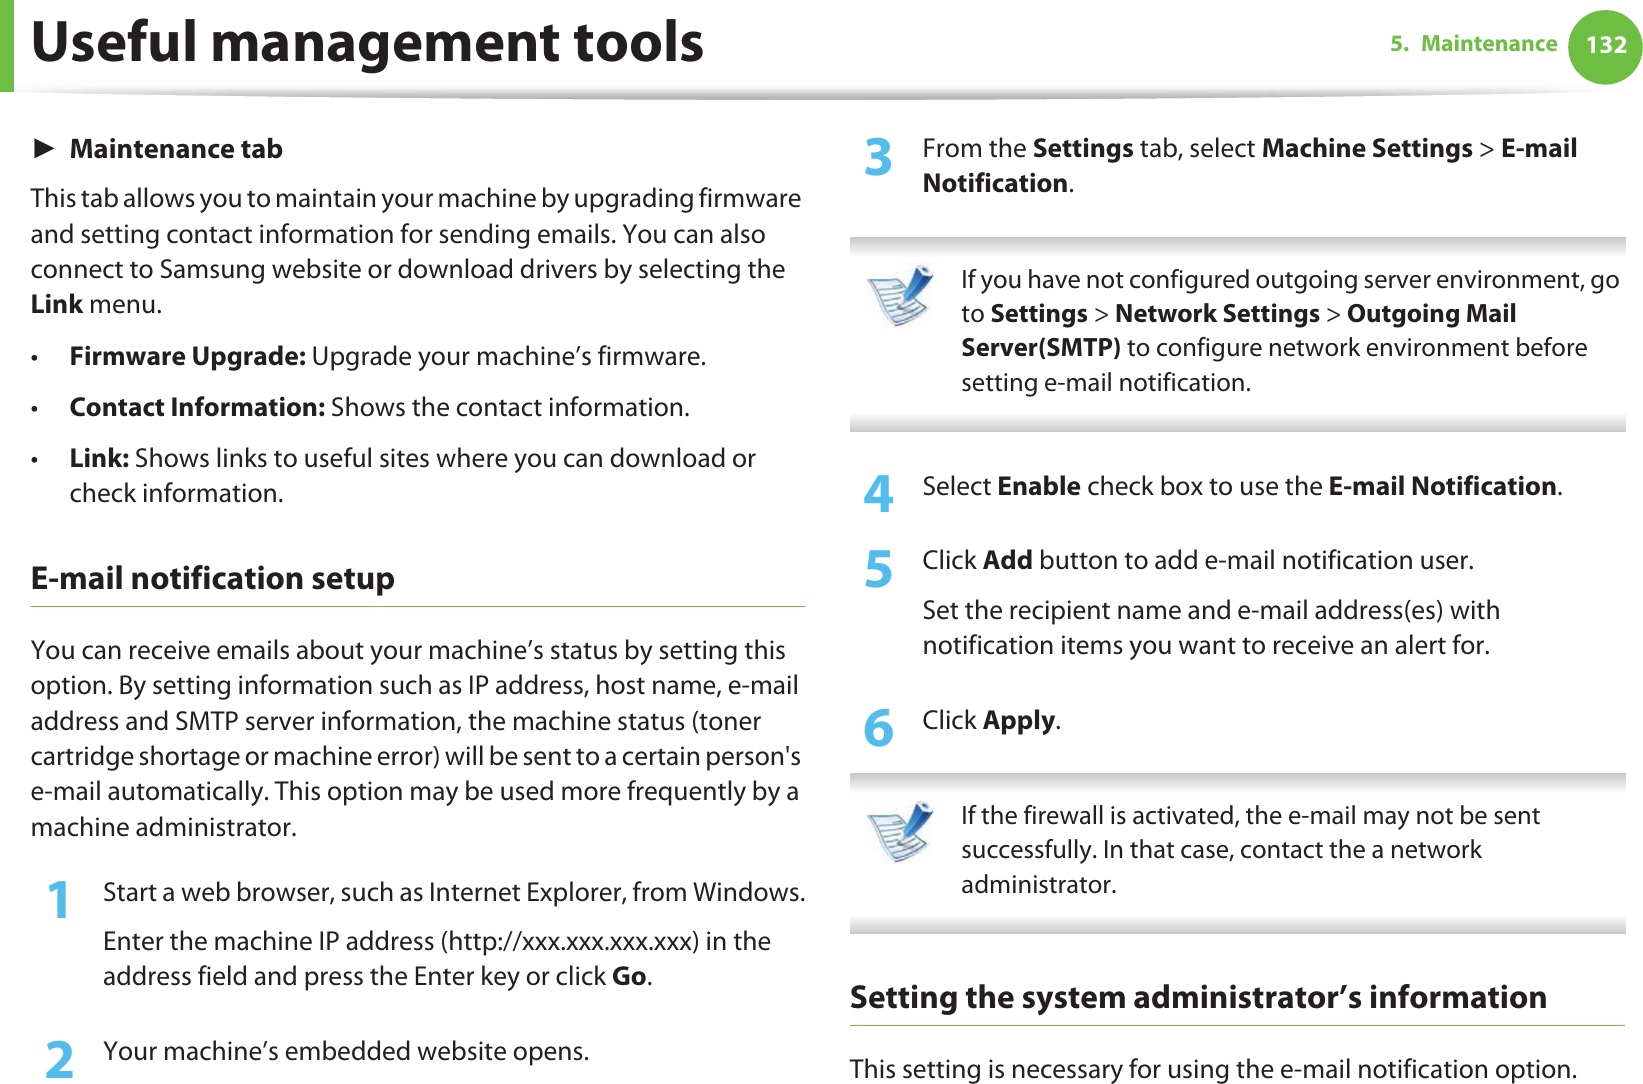 Useful management tools 1325. MaintenanceŹMaintenance tabThis tab allows you to maintain your machine by upgrading firmware and setting contact information for sending emails. You can also connect to Samsung website or download drivers by selecting the Link menu.•Firmware Upgrade: Upgrade your machine’s firmware.•Contact Information: Shows the contact information.•Link: Shows links to useful sites where you can download or check information.E-mail notification setupYou can receive emails about your machine’s status by setting this option. By setting information such as IP address, host name, e-mail address and SMTP server information, the machine status (toner cartridge shortage or machine error) will be sent to a certain person&apos;s e-mail automatically. This option may be used more frequently by a machine administrator. 1Start a web browser, such as Internet Explorer, from Windows.Enter the machine IP address (http://xxx.xxx.xxx.xxx) in the address field and press the Enter key or click Go.2  Your machine’s embedded website opens.3  From the Settings tab, select Machine Settings &gt; E-mail Notification.  If you have not configured outgoing server environment, go to Settings &gt; Network Settings &gt; Outgoing Mail Server(SMTP) to configure network environment before setting e-mail notification.  4  Select Enable check box to use the E-mail Notification.5  Click Add button to add e-mail notification user. Set the recipient name and e-mail address(es) with notification items you want to receive an alert for.6  Click Apply. If the firewall is activated, the e-mail may not be sent successfully. In that case, contact the a network administrator. Setting the system administrator’s informationThis setting is necessary for using the e-mail notification option.